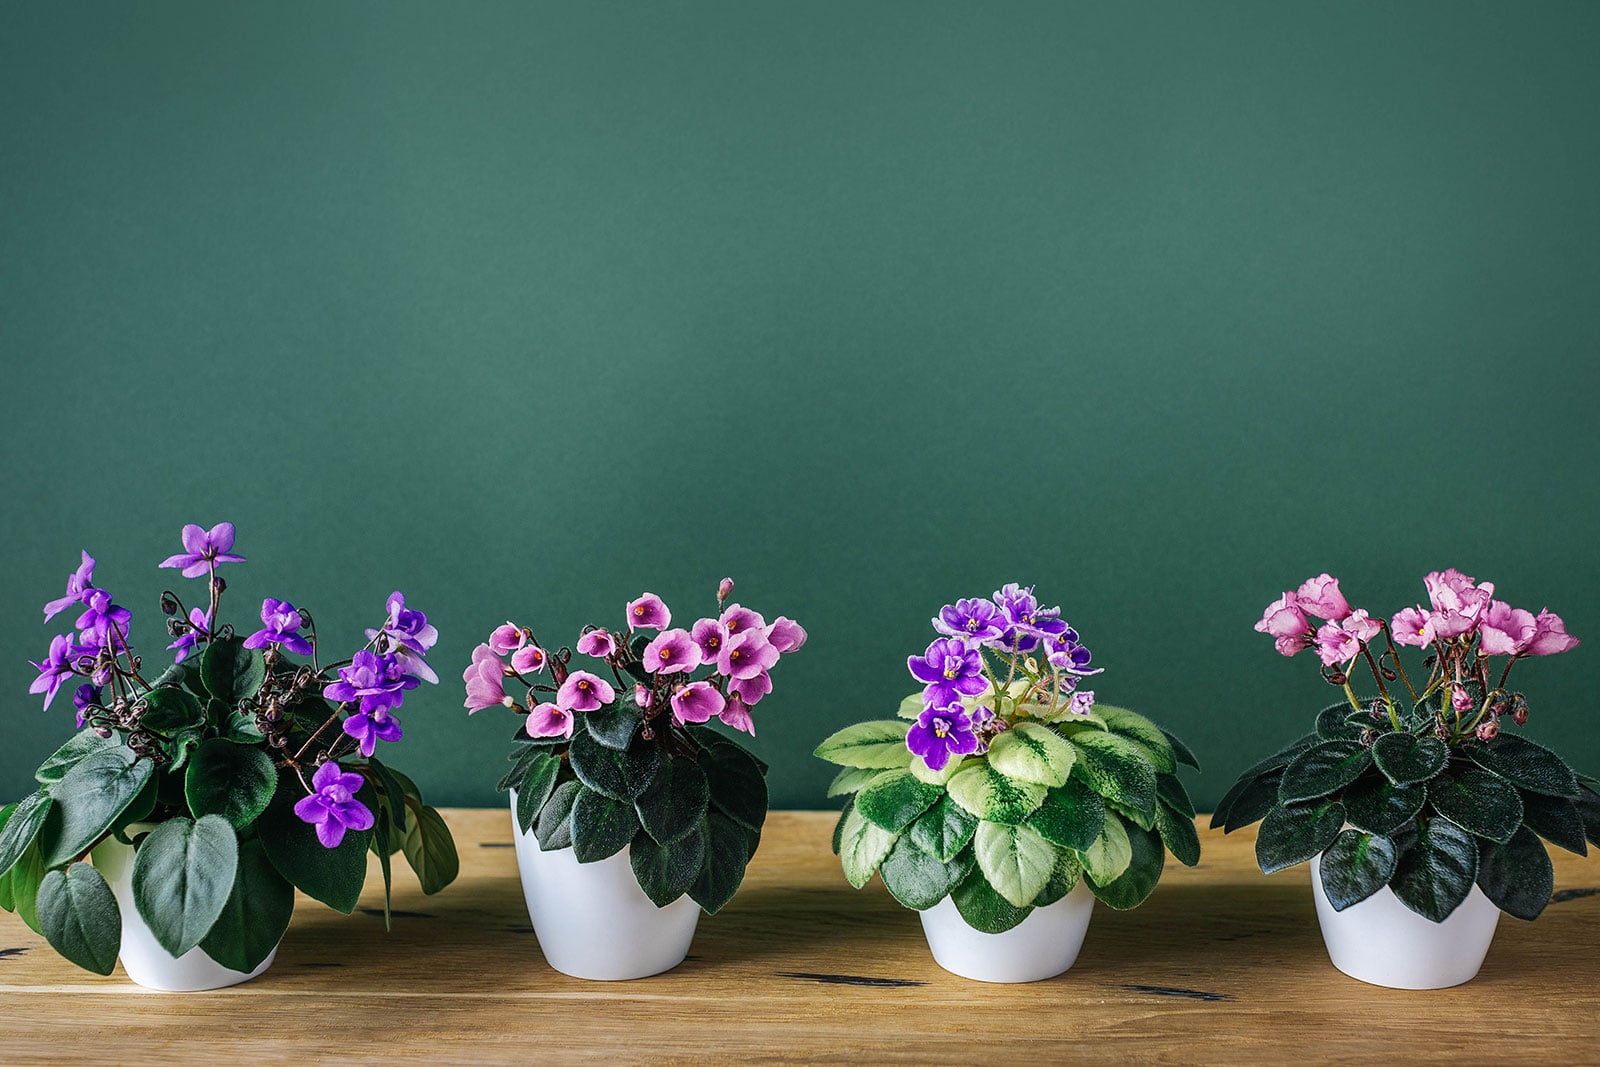 African violet care: easy guide to growing African violets and making them bloom